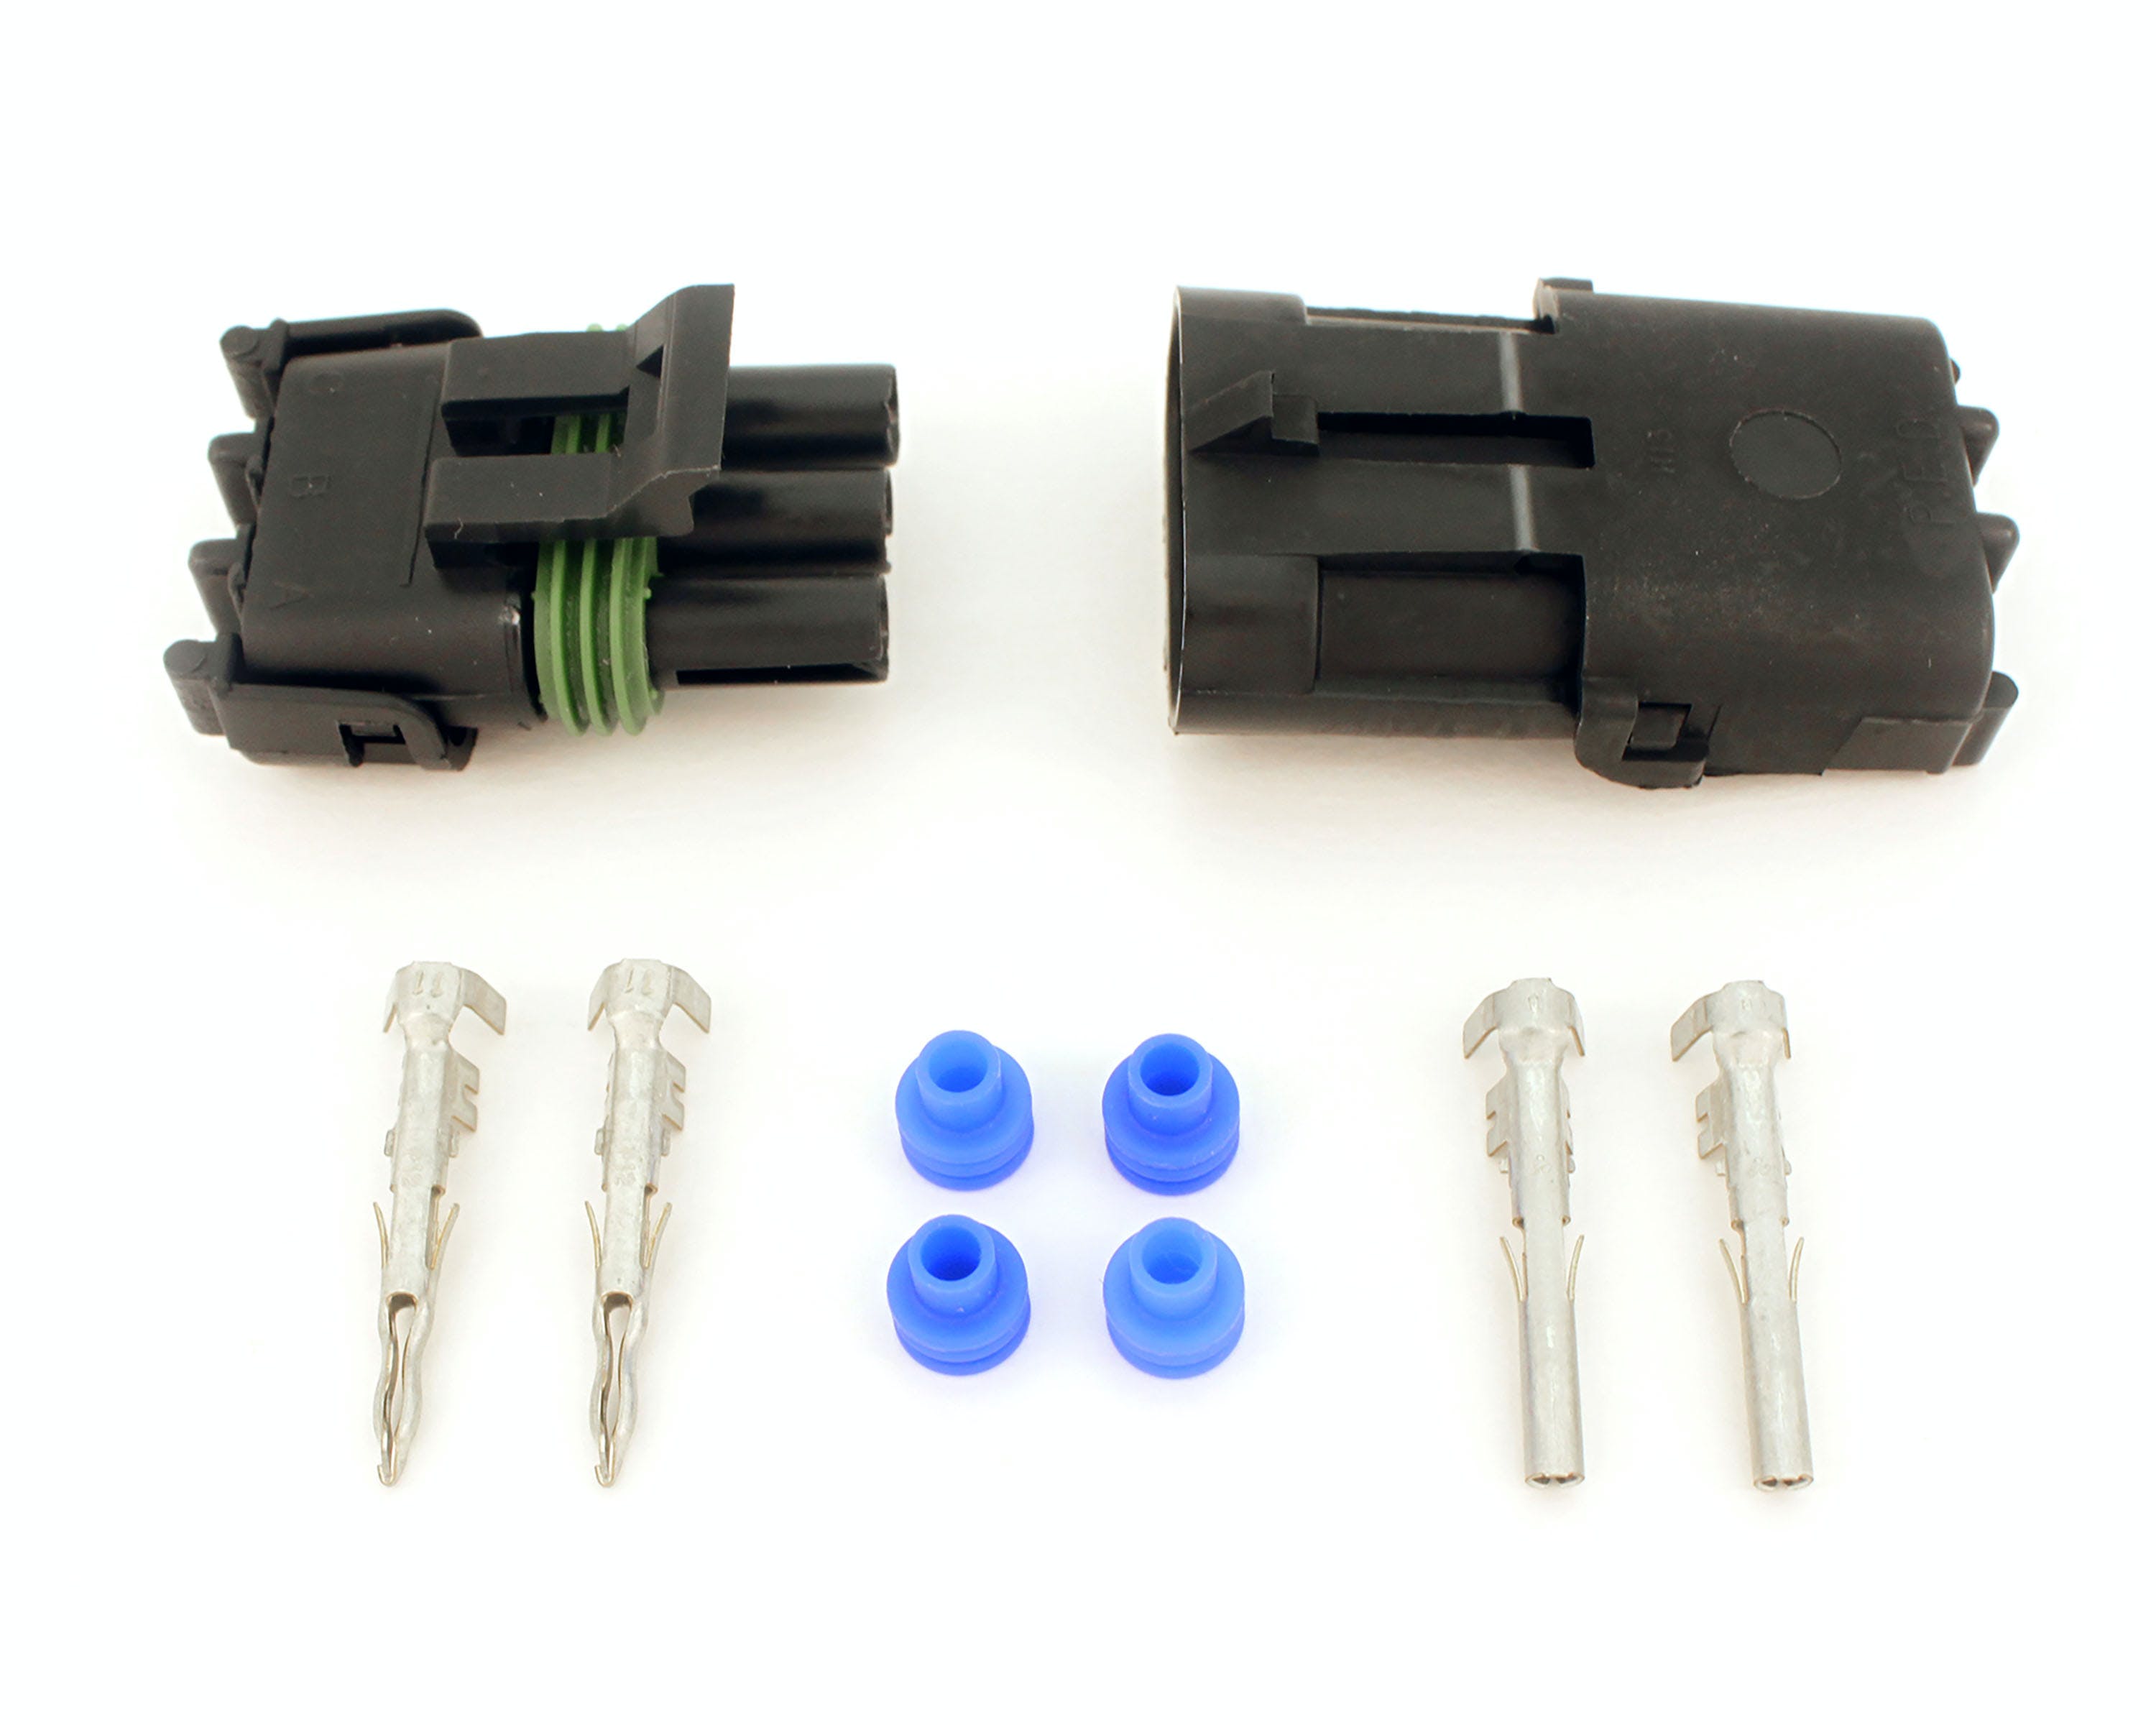 FAST - Fuel Air Spark Technology 6000-6723 3 Pin Weatherpack Connector Kit